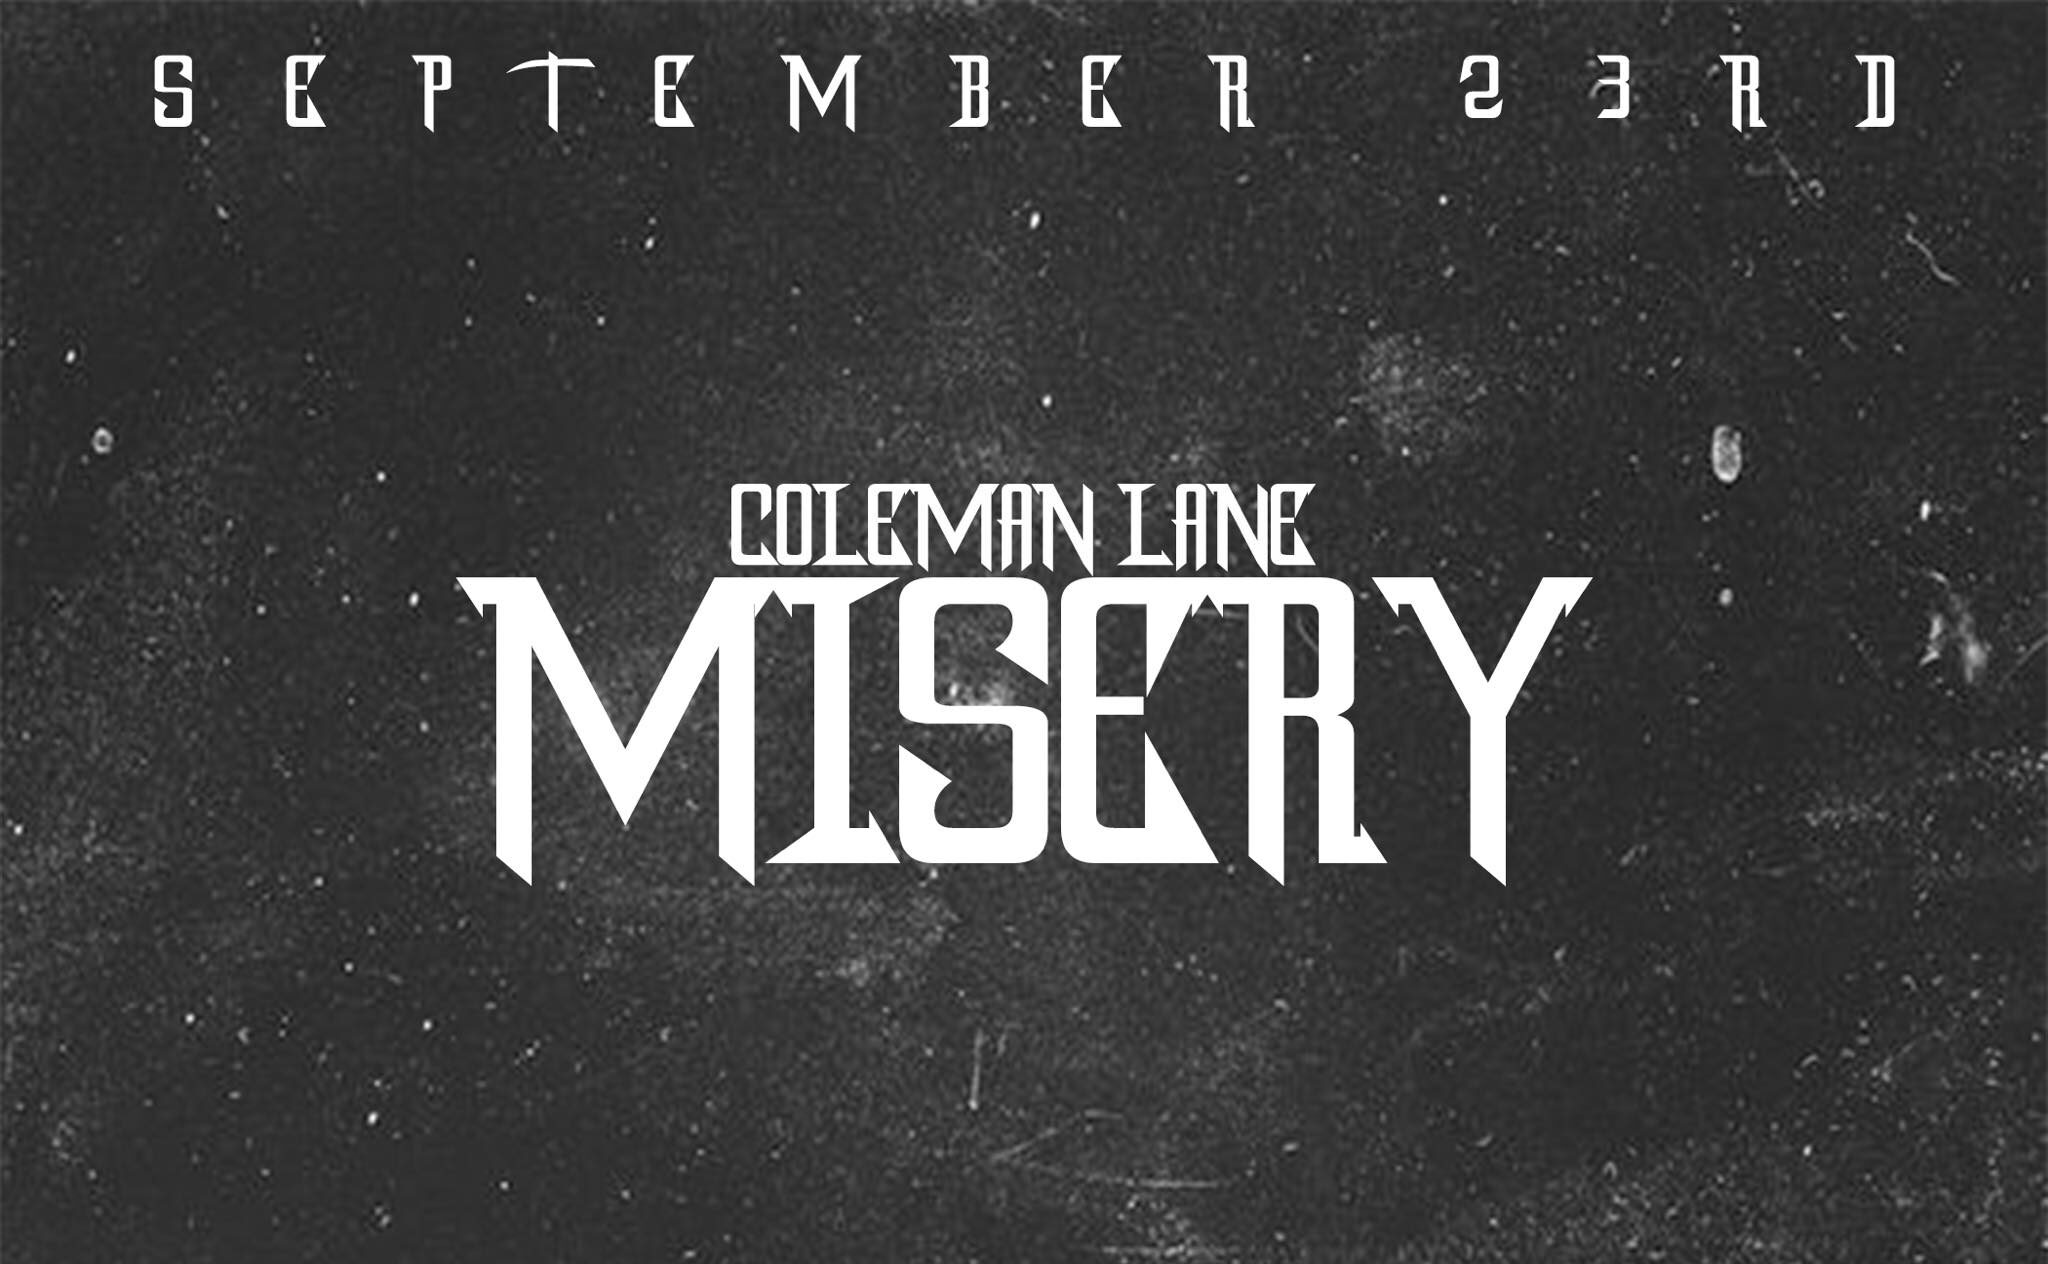 Northern Kentucky Hip-Hop Artist Coleman Lane Releases His New Single "Misery"